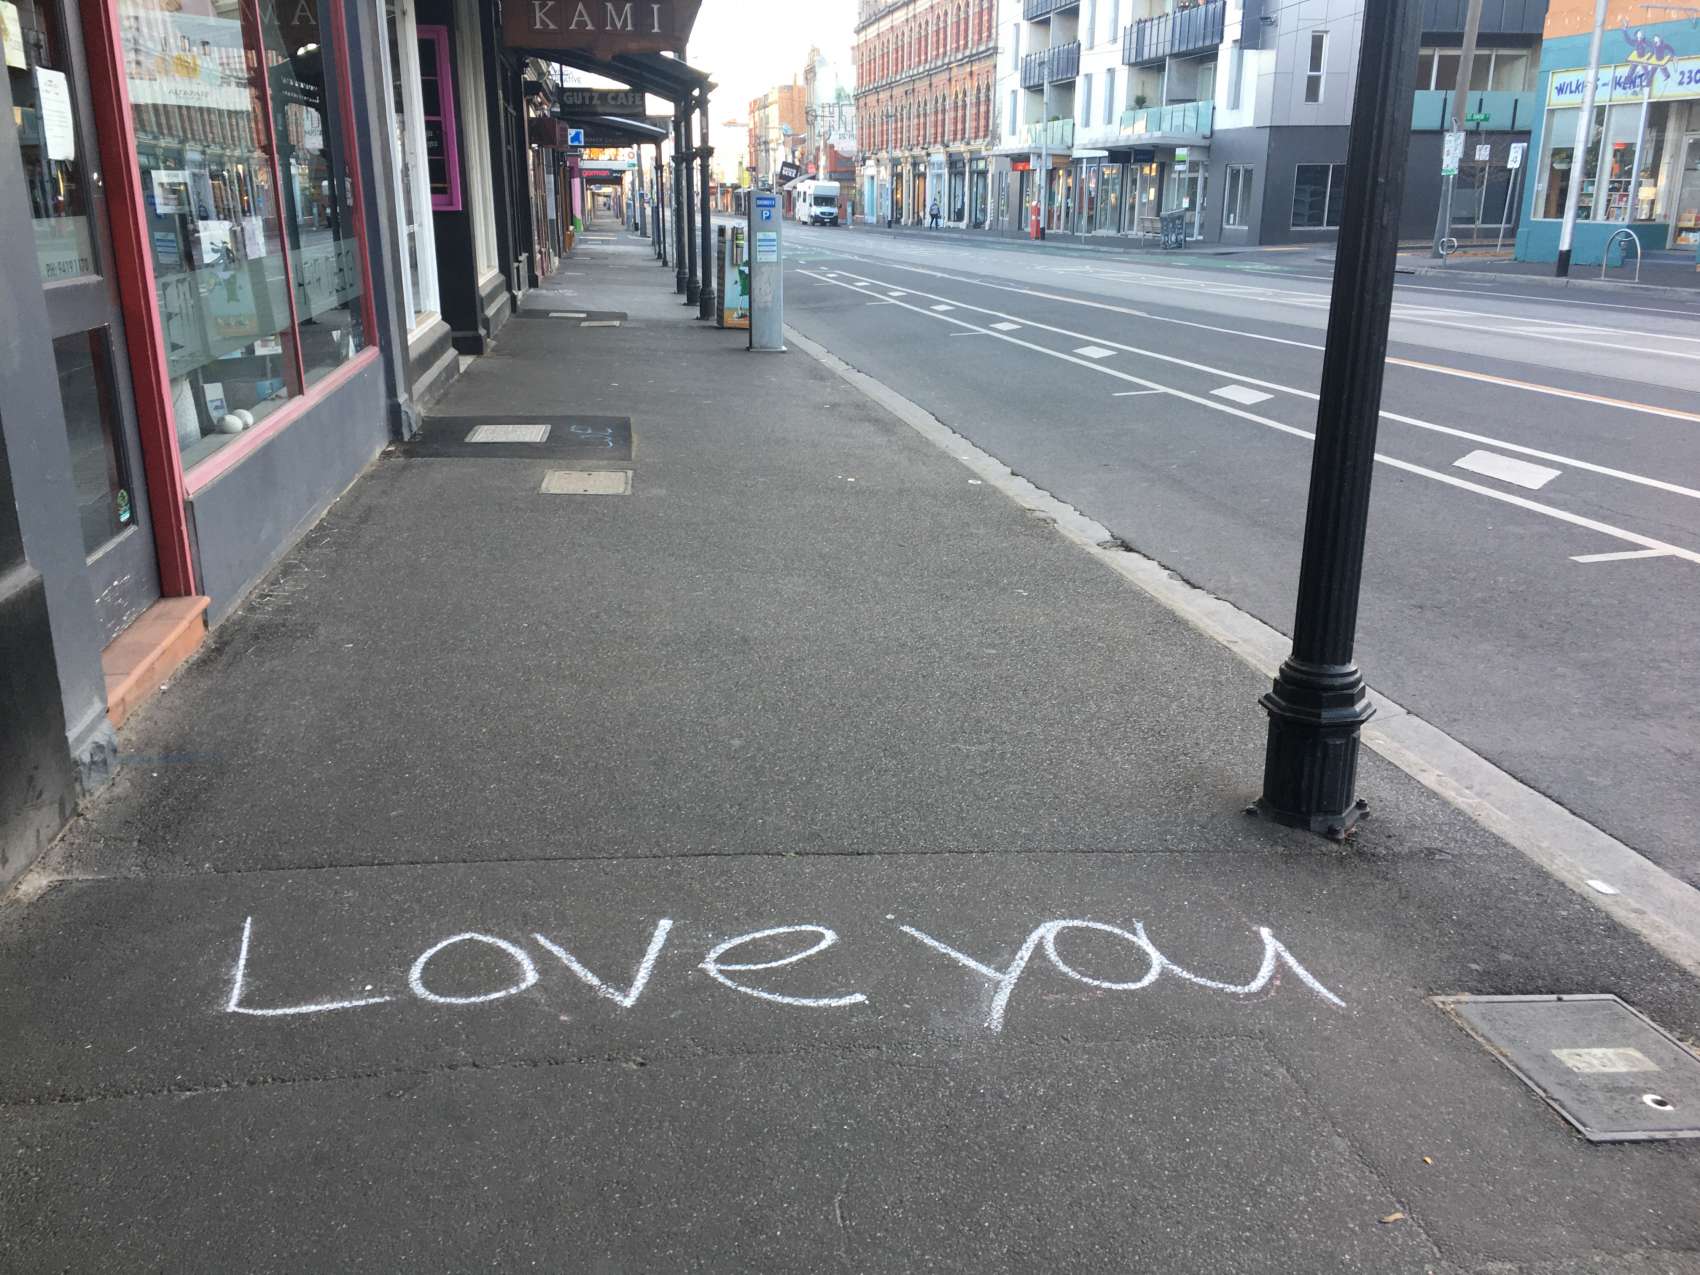 Brunswick Street with words I Love You on pavement